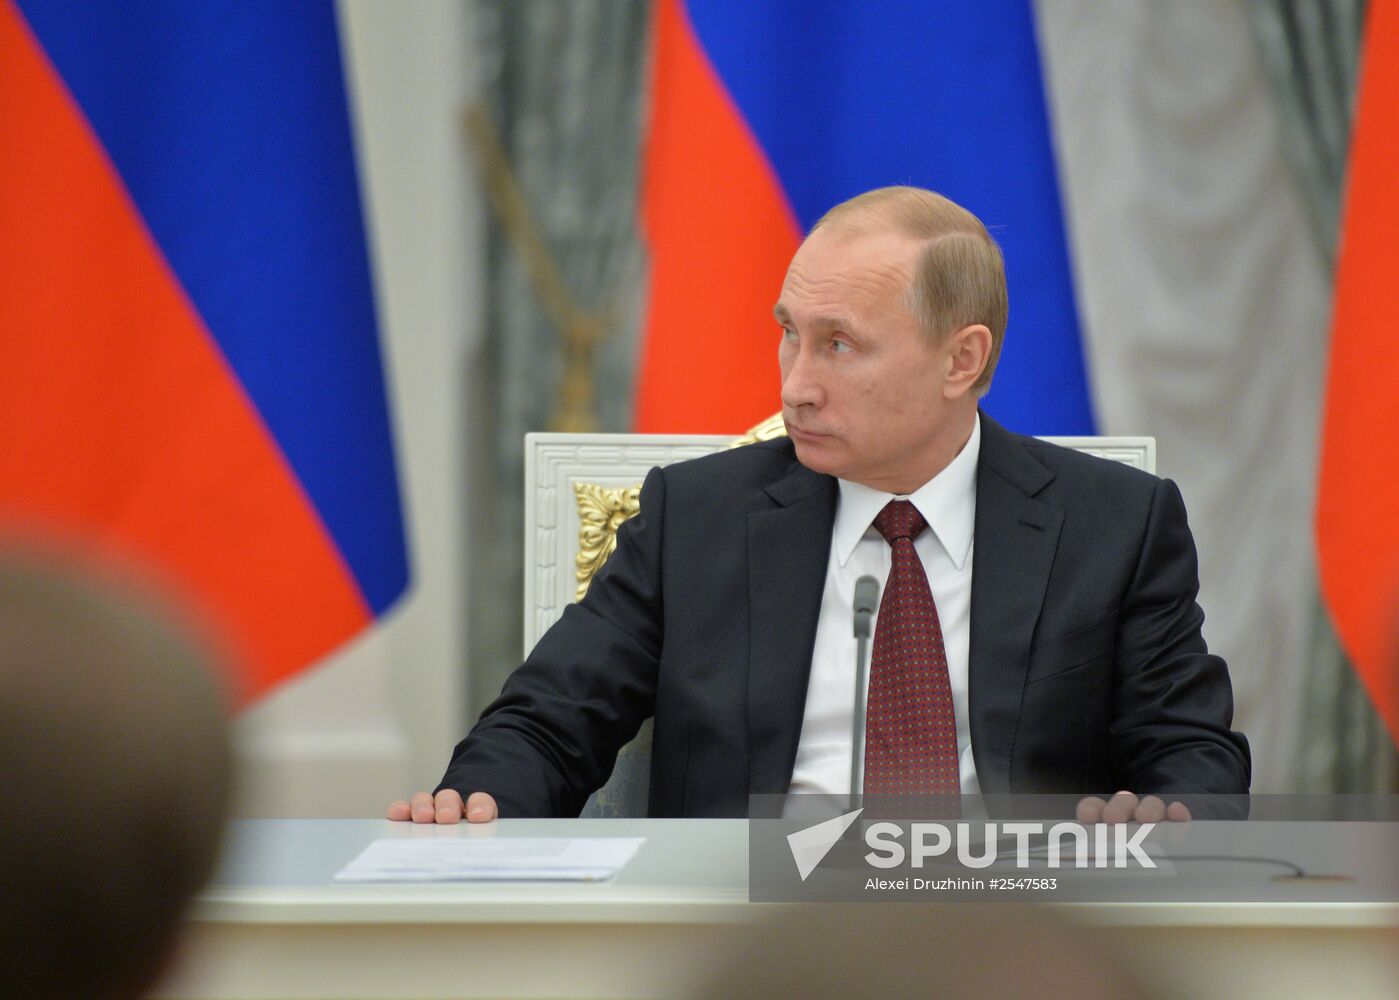 Vladimir Putin meets with representatives of both chambers of Russia’s Federal Assembly